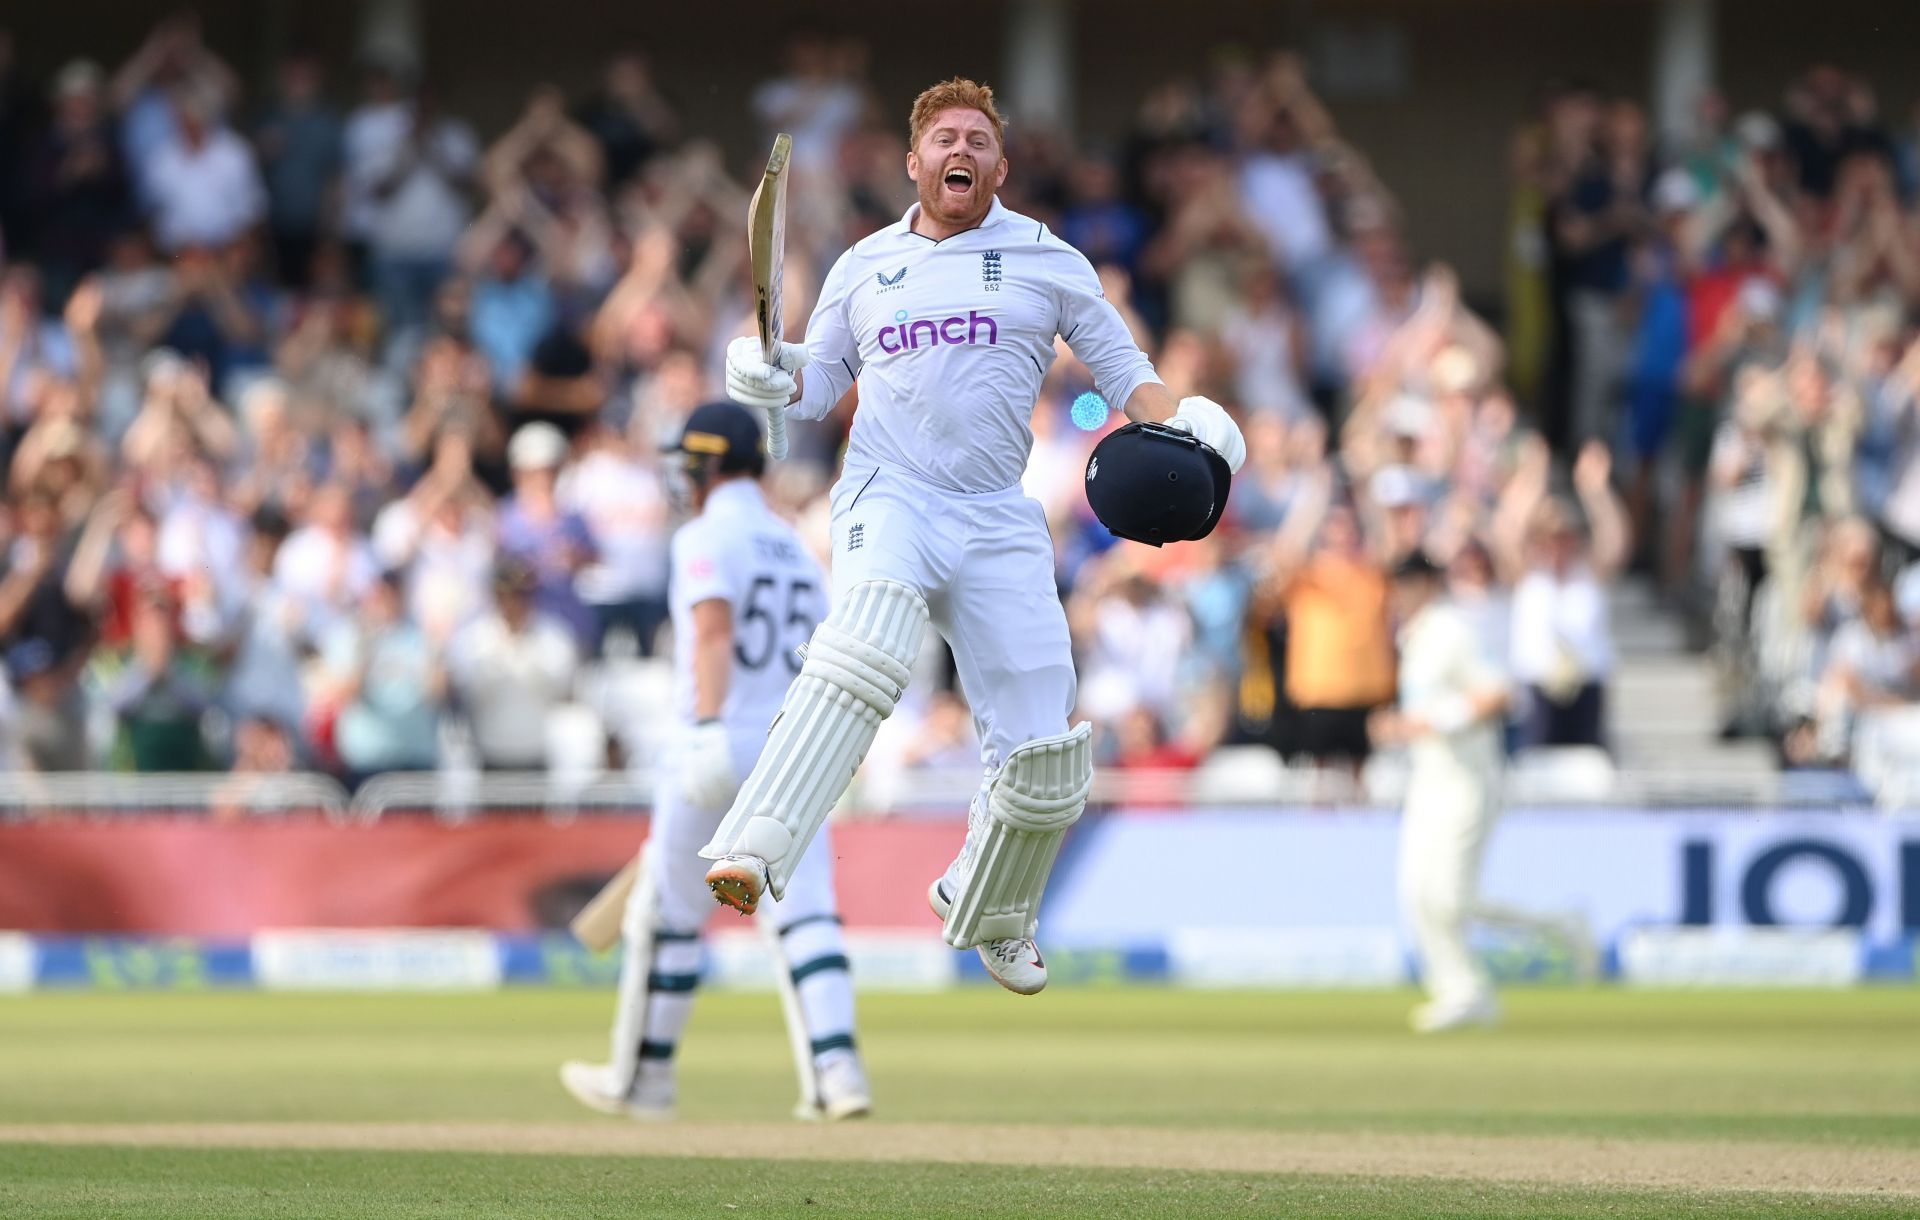 Jonny Bairstow celebrates his century in the Nottingham Test. Pic: Getty Images